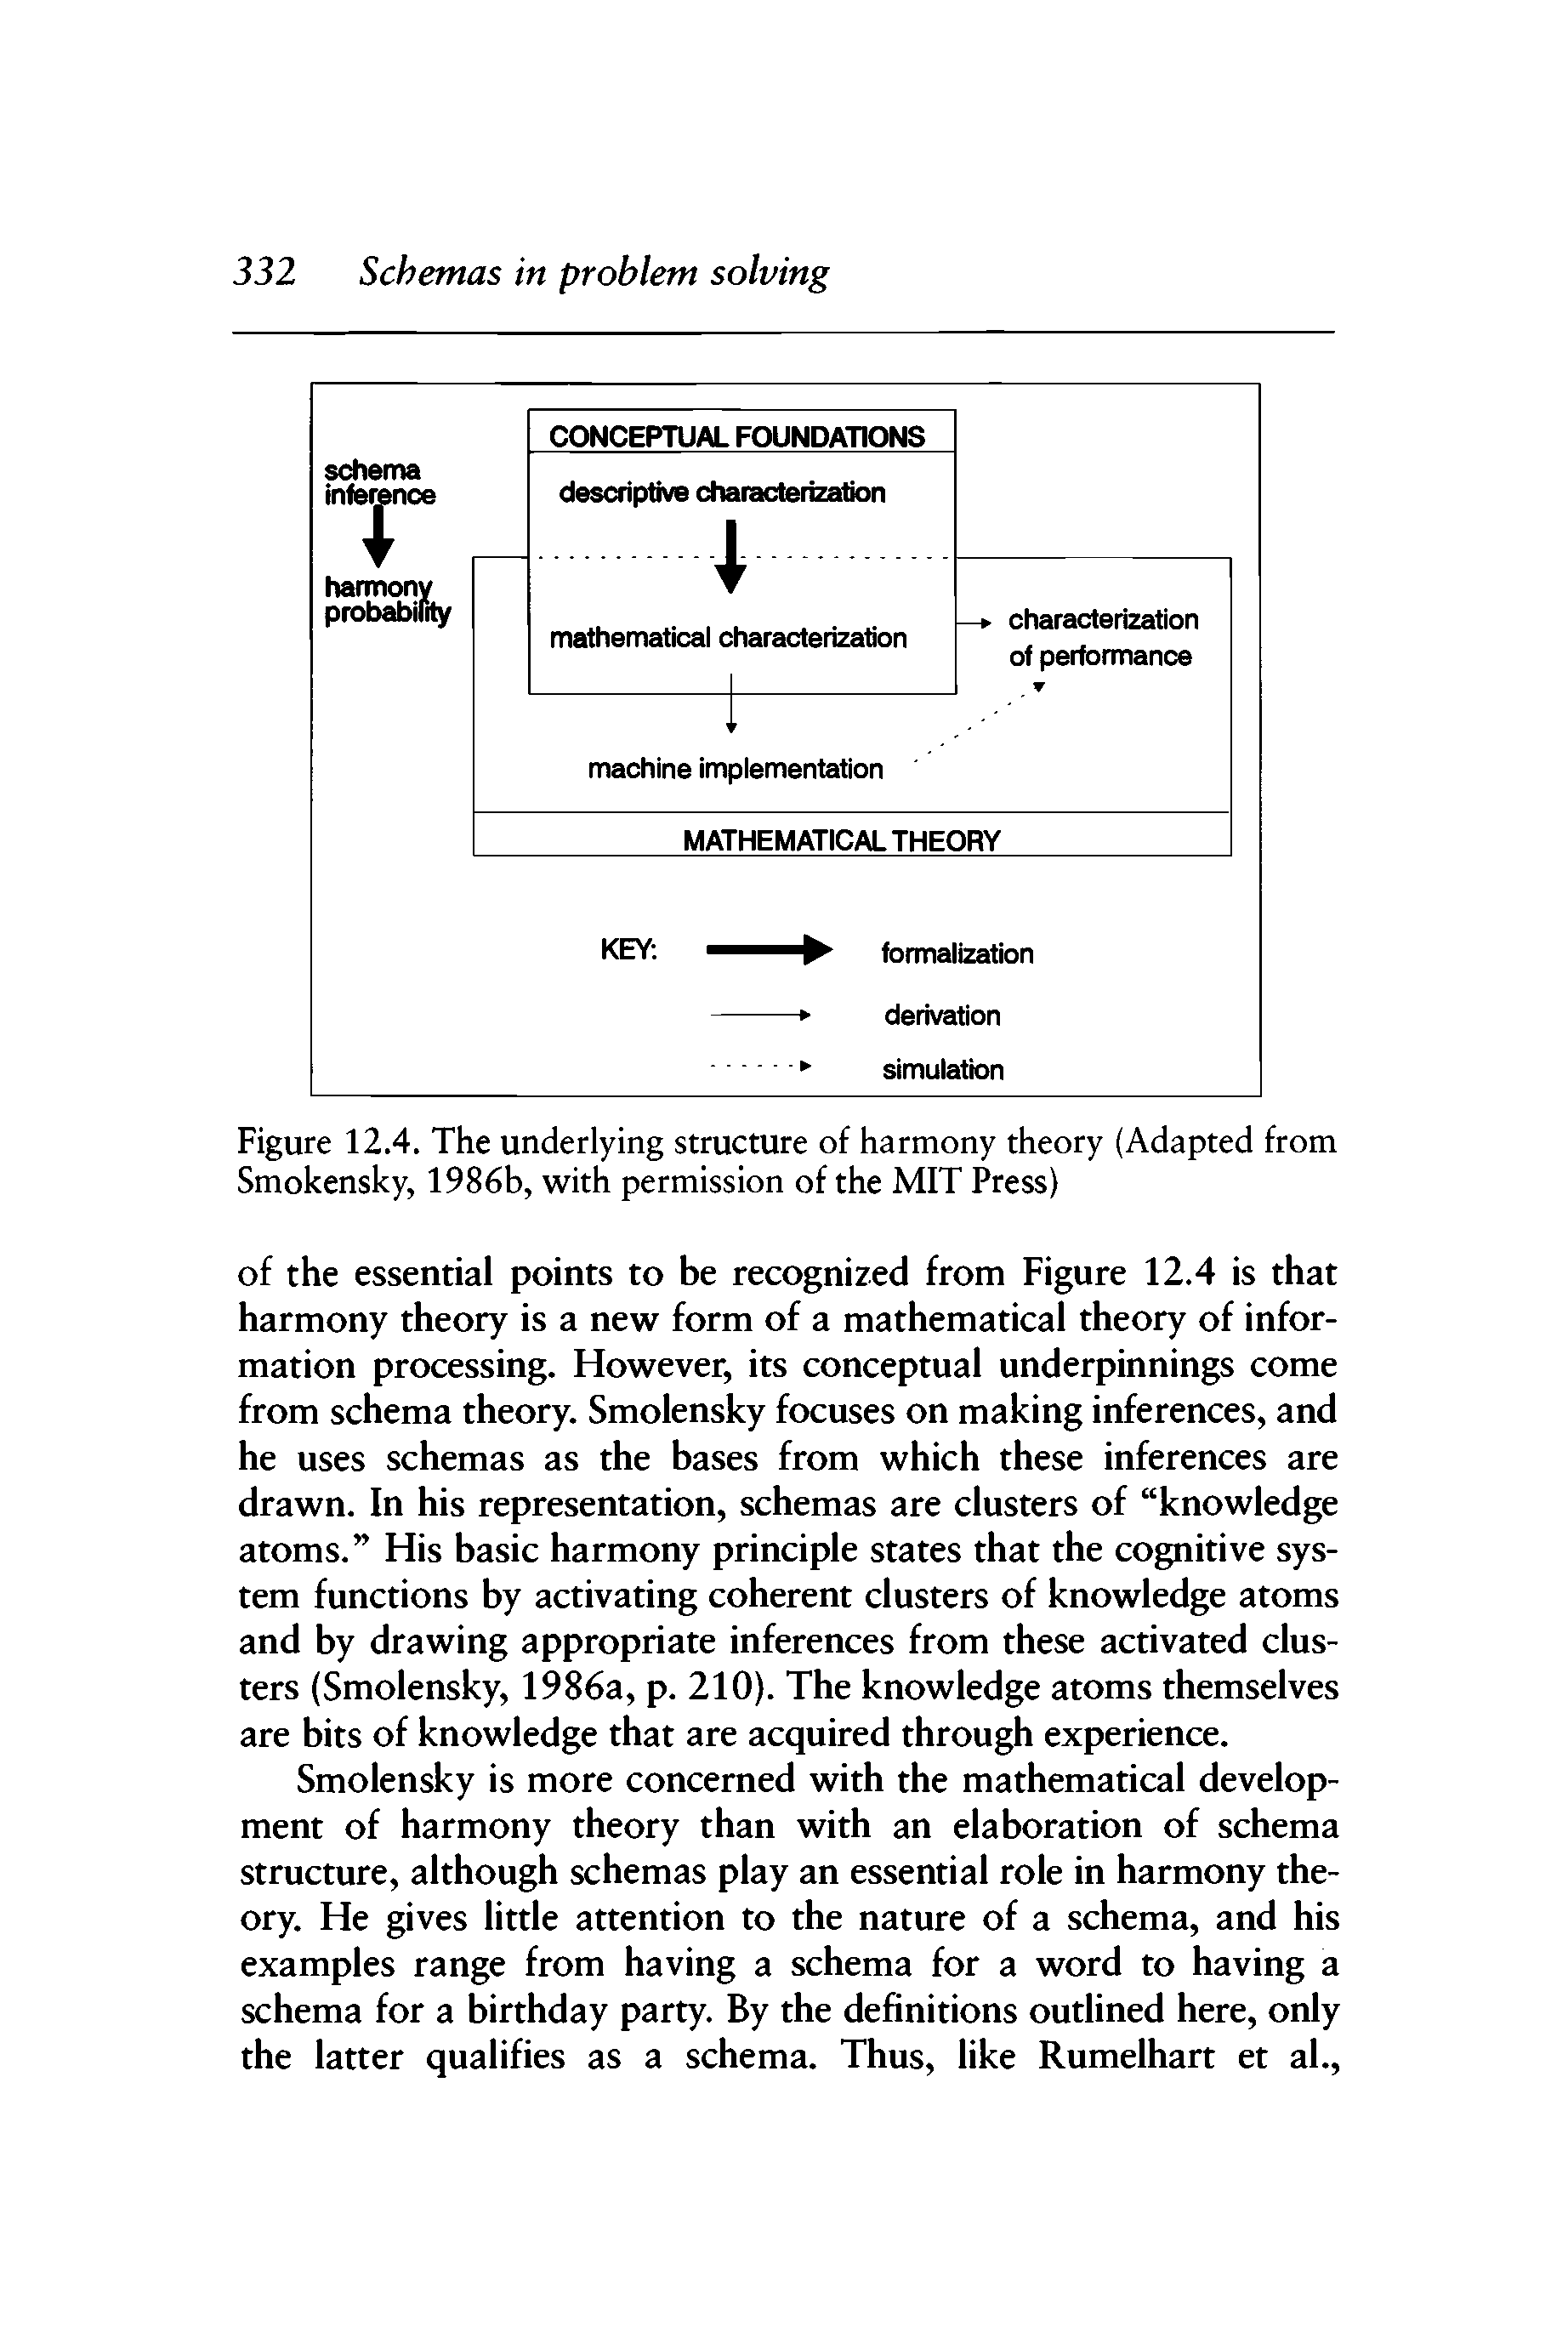 Figure 12.4. The underlying structure of harmony theory (Adapted from Smokensky, 1986b, with permission of the MIT Press)...